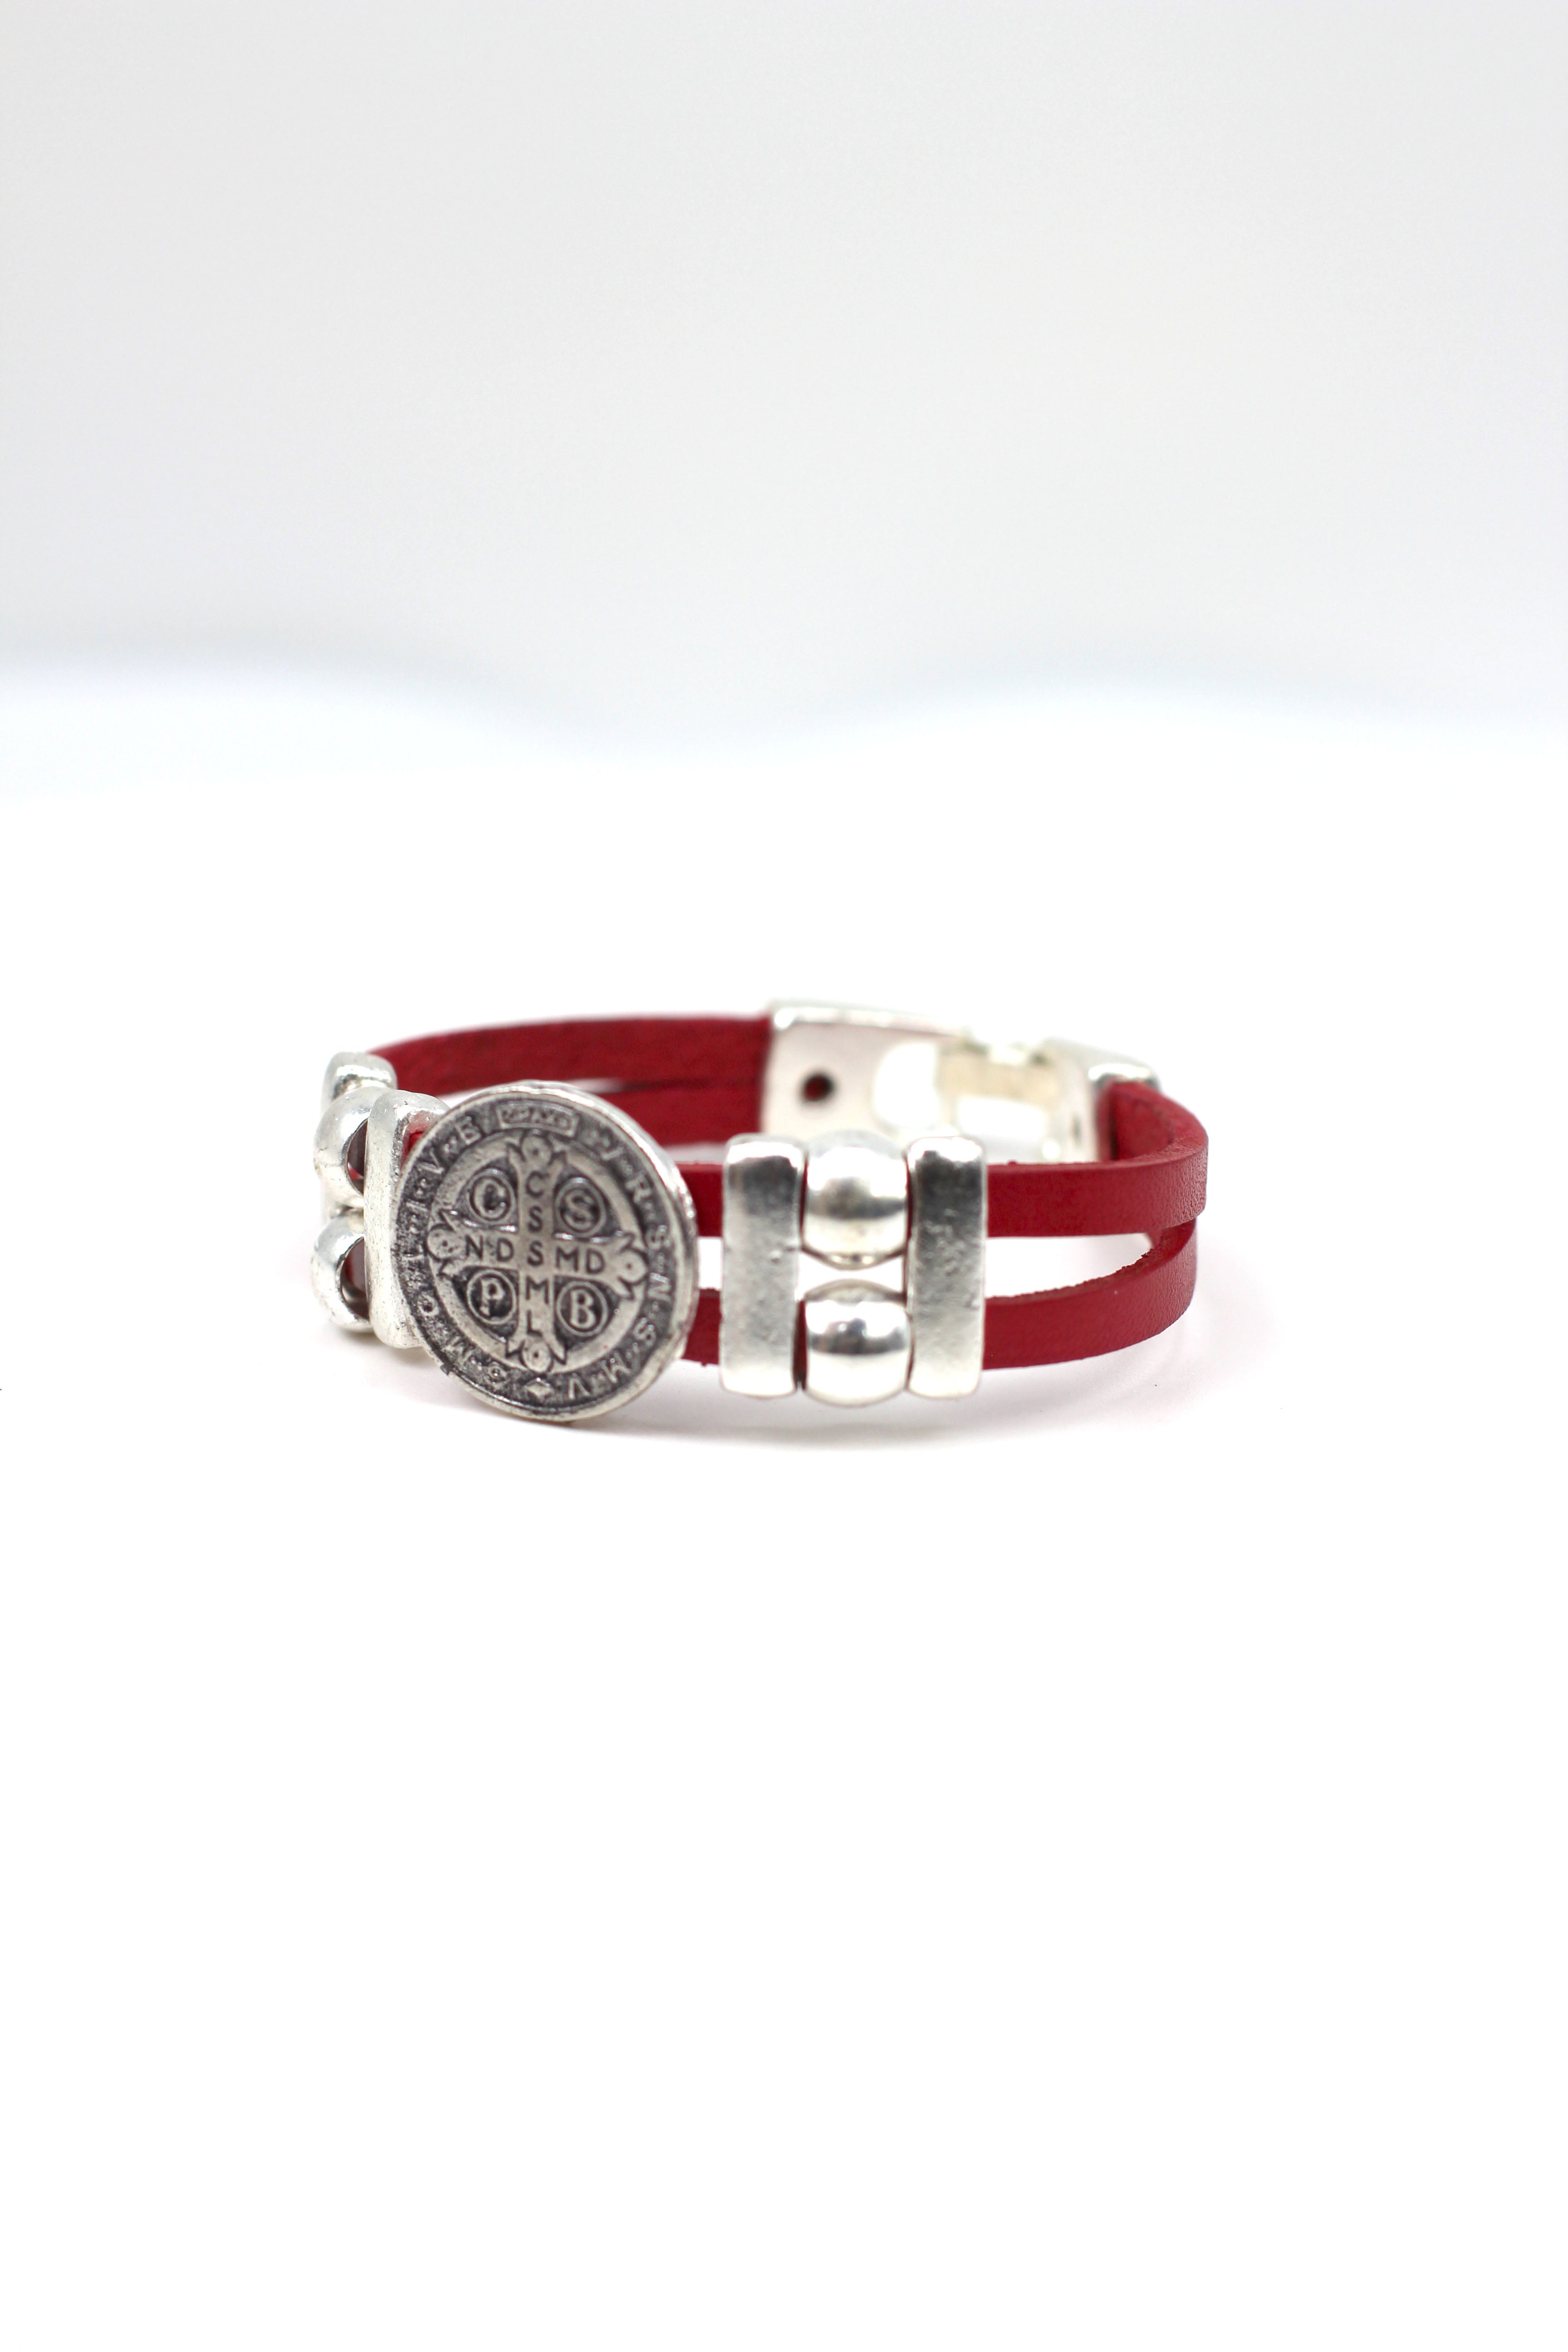 Vintage St. Benedict bracelet handmade jewelry with Double Leather Straps by Graciela's Collection